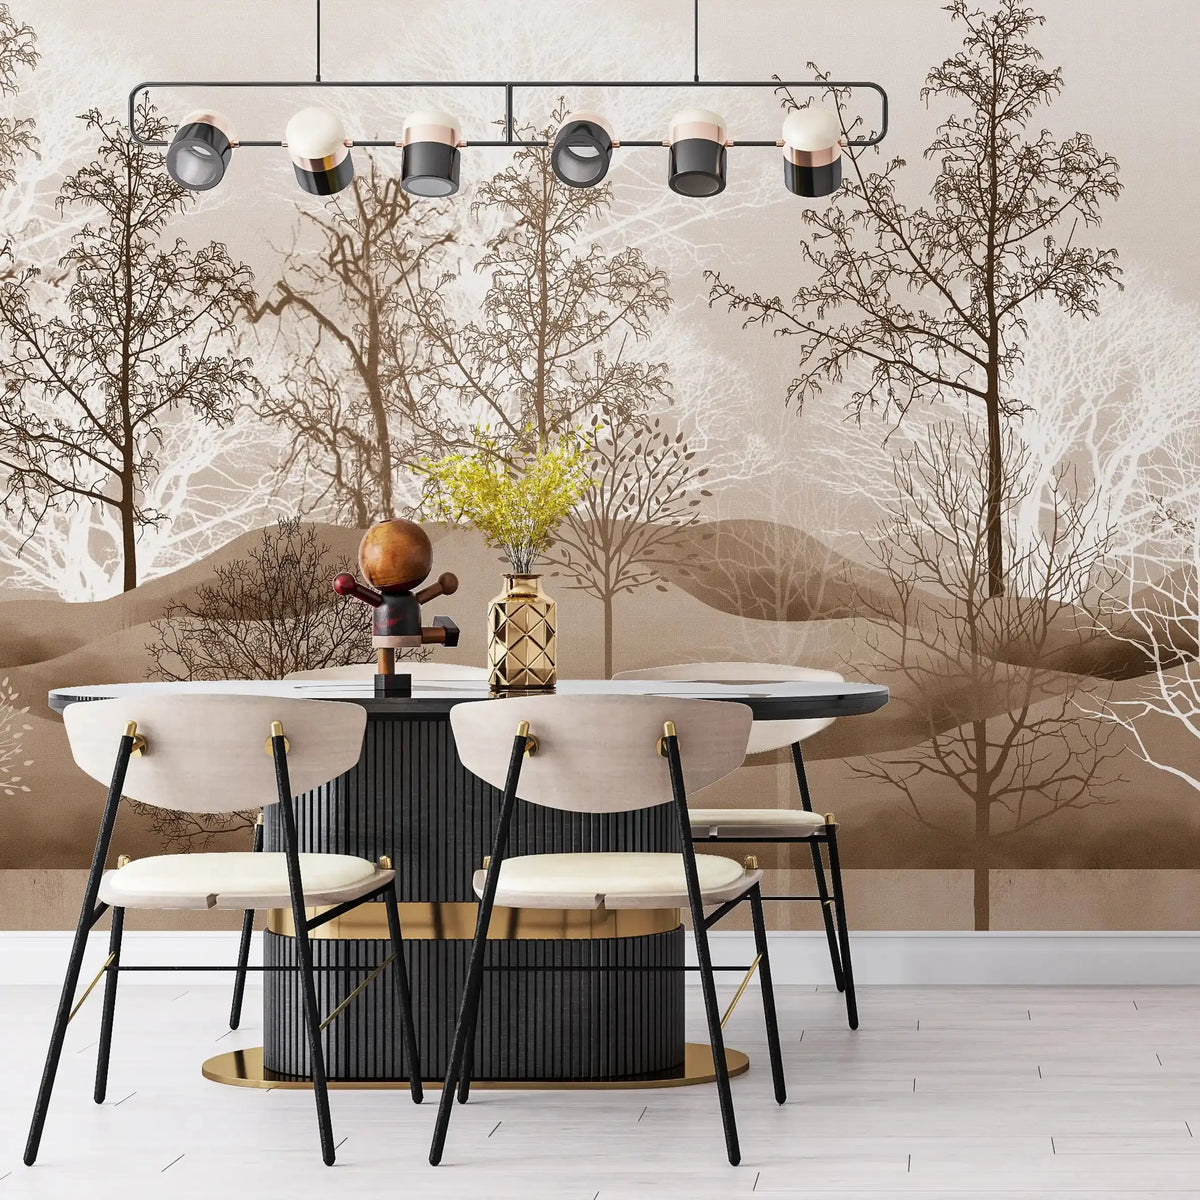 3040-D / Nature-Inspired Peel and Stick Wallpaper: Winter Landscape with Trees and Birds, Perfect for Bathroom and Bedroom - Artevella